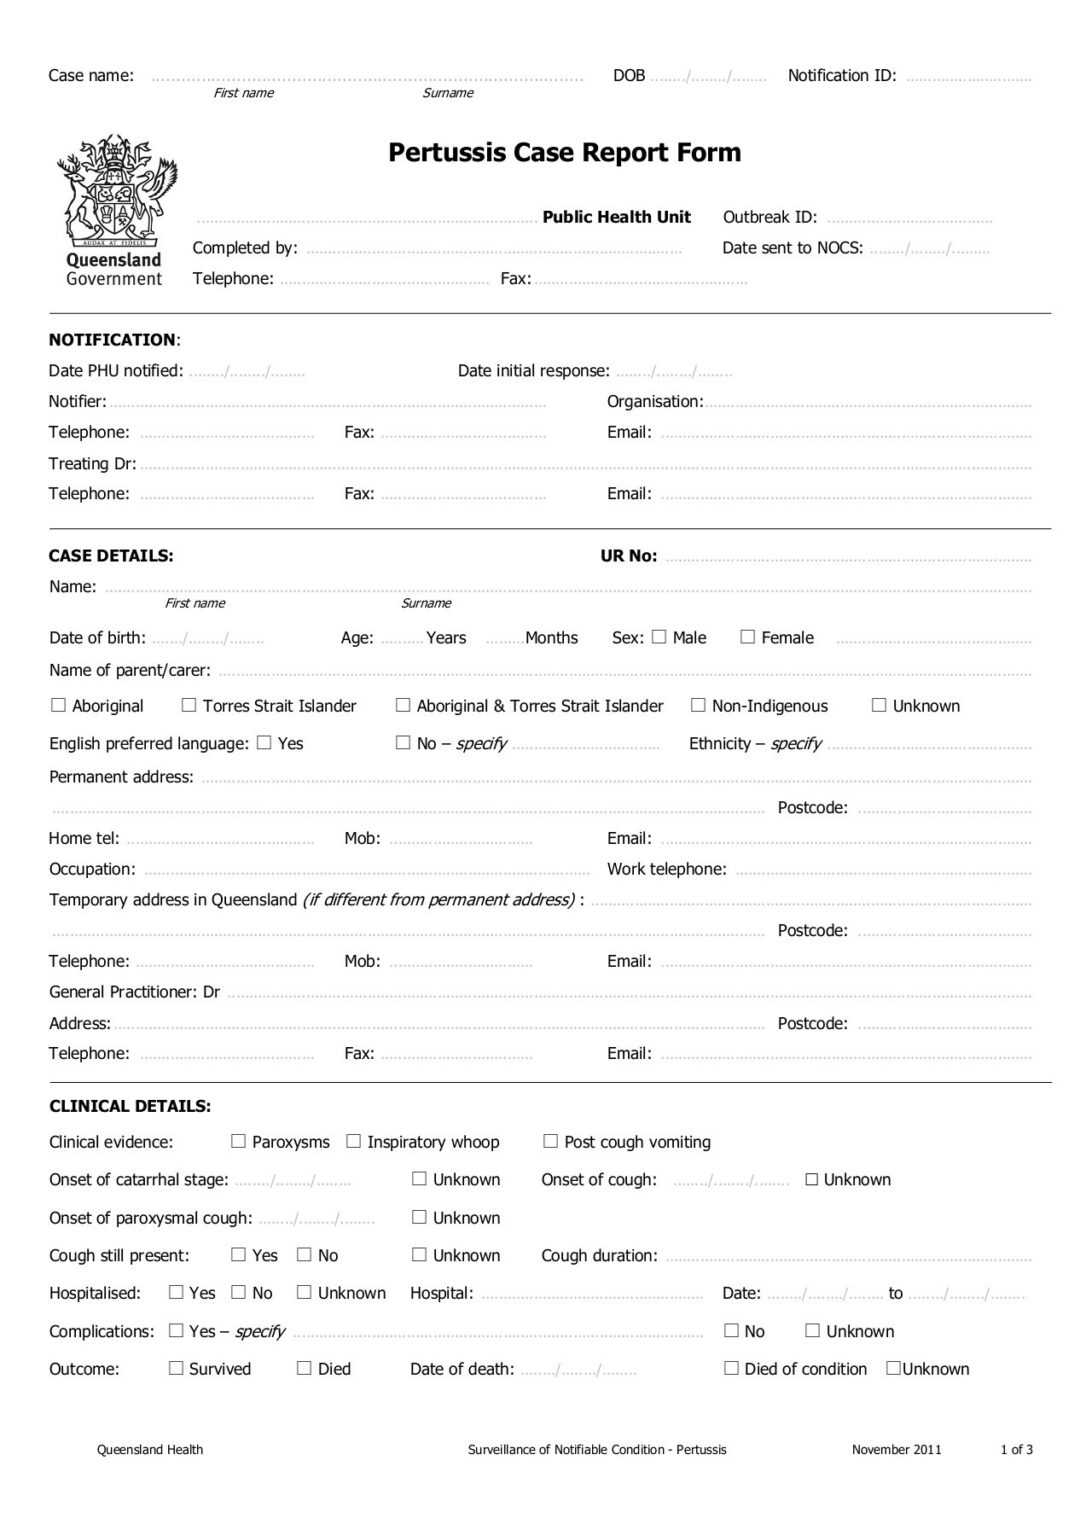 pertussis-case-report-form-queensland-health-in-case-report-form